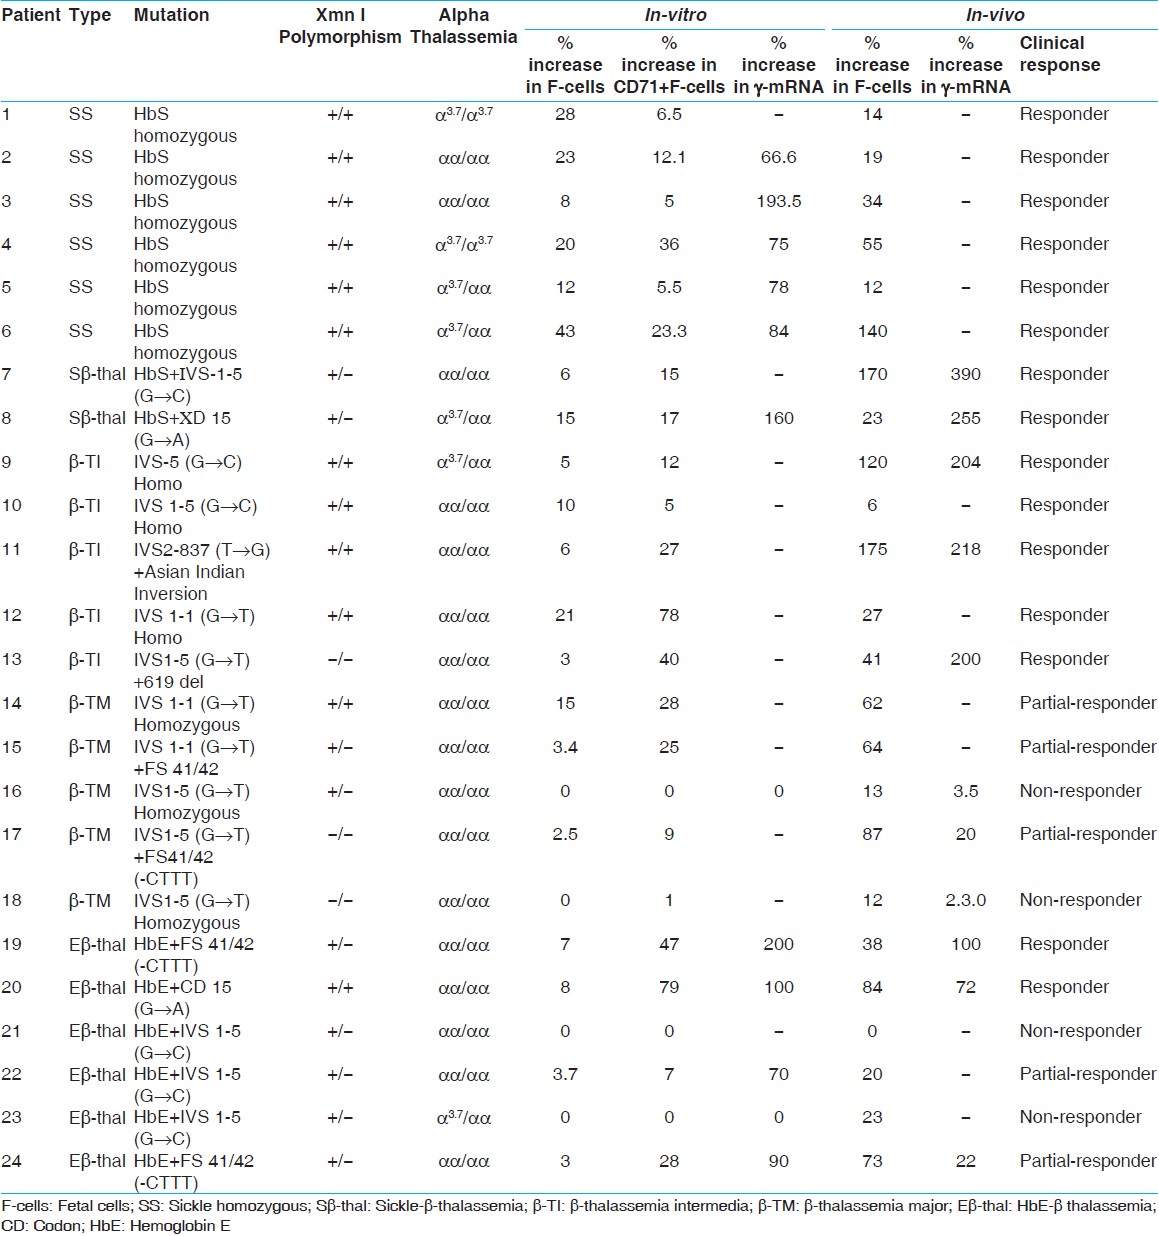 Table 2: Comparison of the percent increase in F-cells, CD71+F-cells and g -mRNA expression of cultured erythroid cells (<i>in-vitro</i>) with the <i>in-vivo</i> percent increase in F - cells and mRNA expression in few patients before and after hydroxyurea therapy